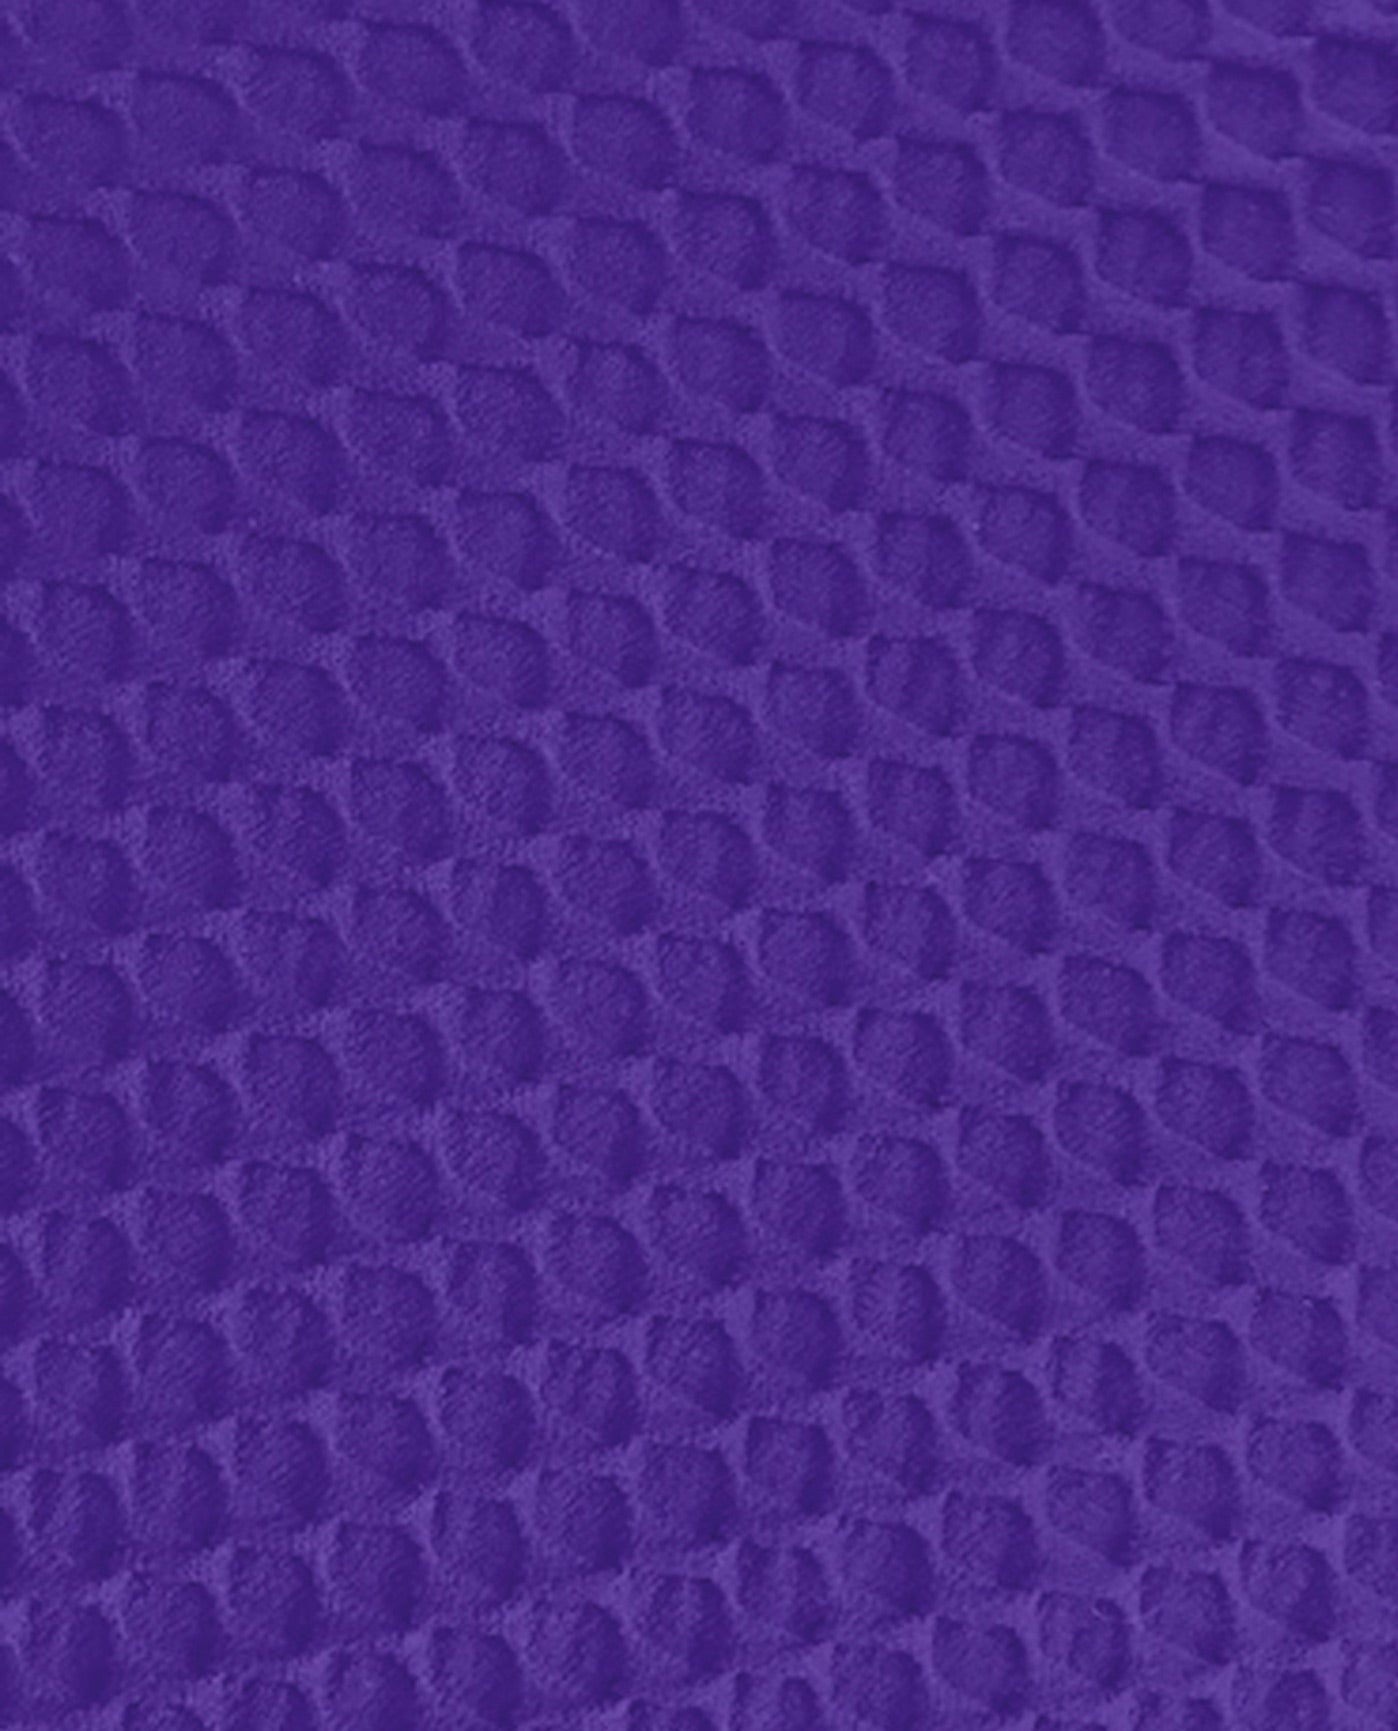 FABRIC SWATCH VIEW OF CHLORINE RESISTANT AQUAMORE COLOR BLOCK TEXTURED SCOOP NECK ONE PIECE SWIMSUIT | 607 AQT TEXTURED PURPLE